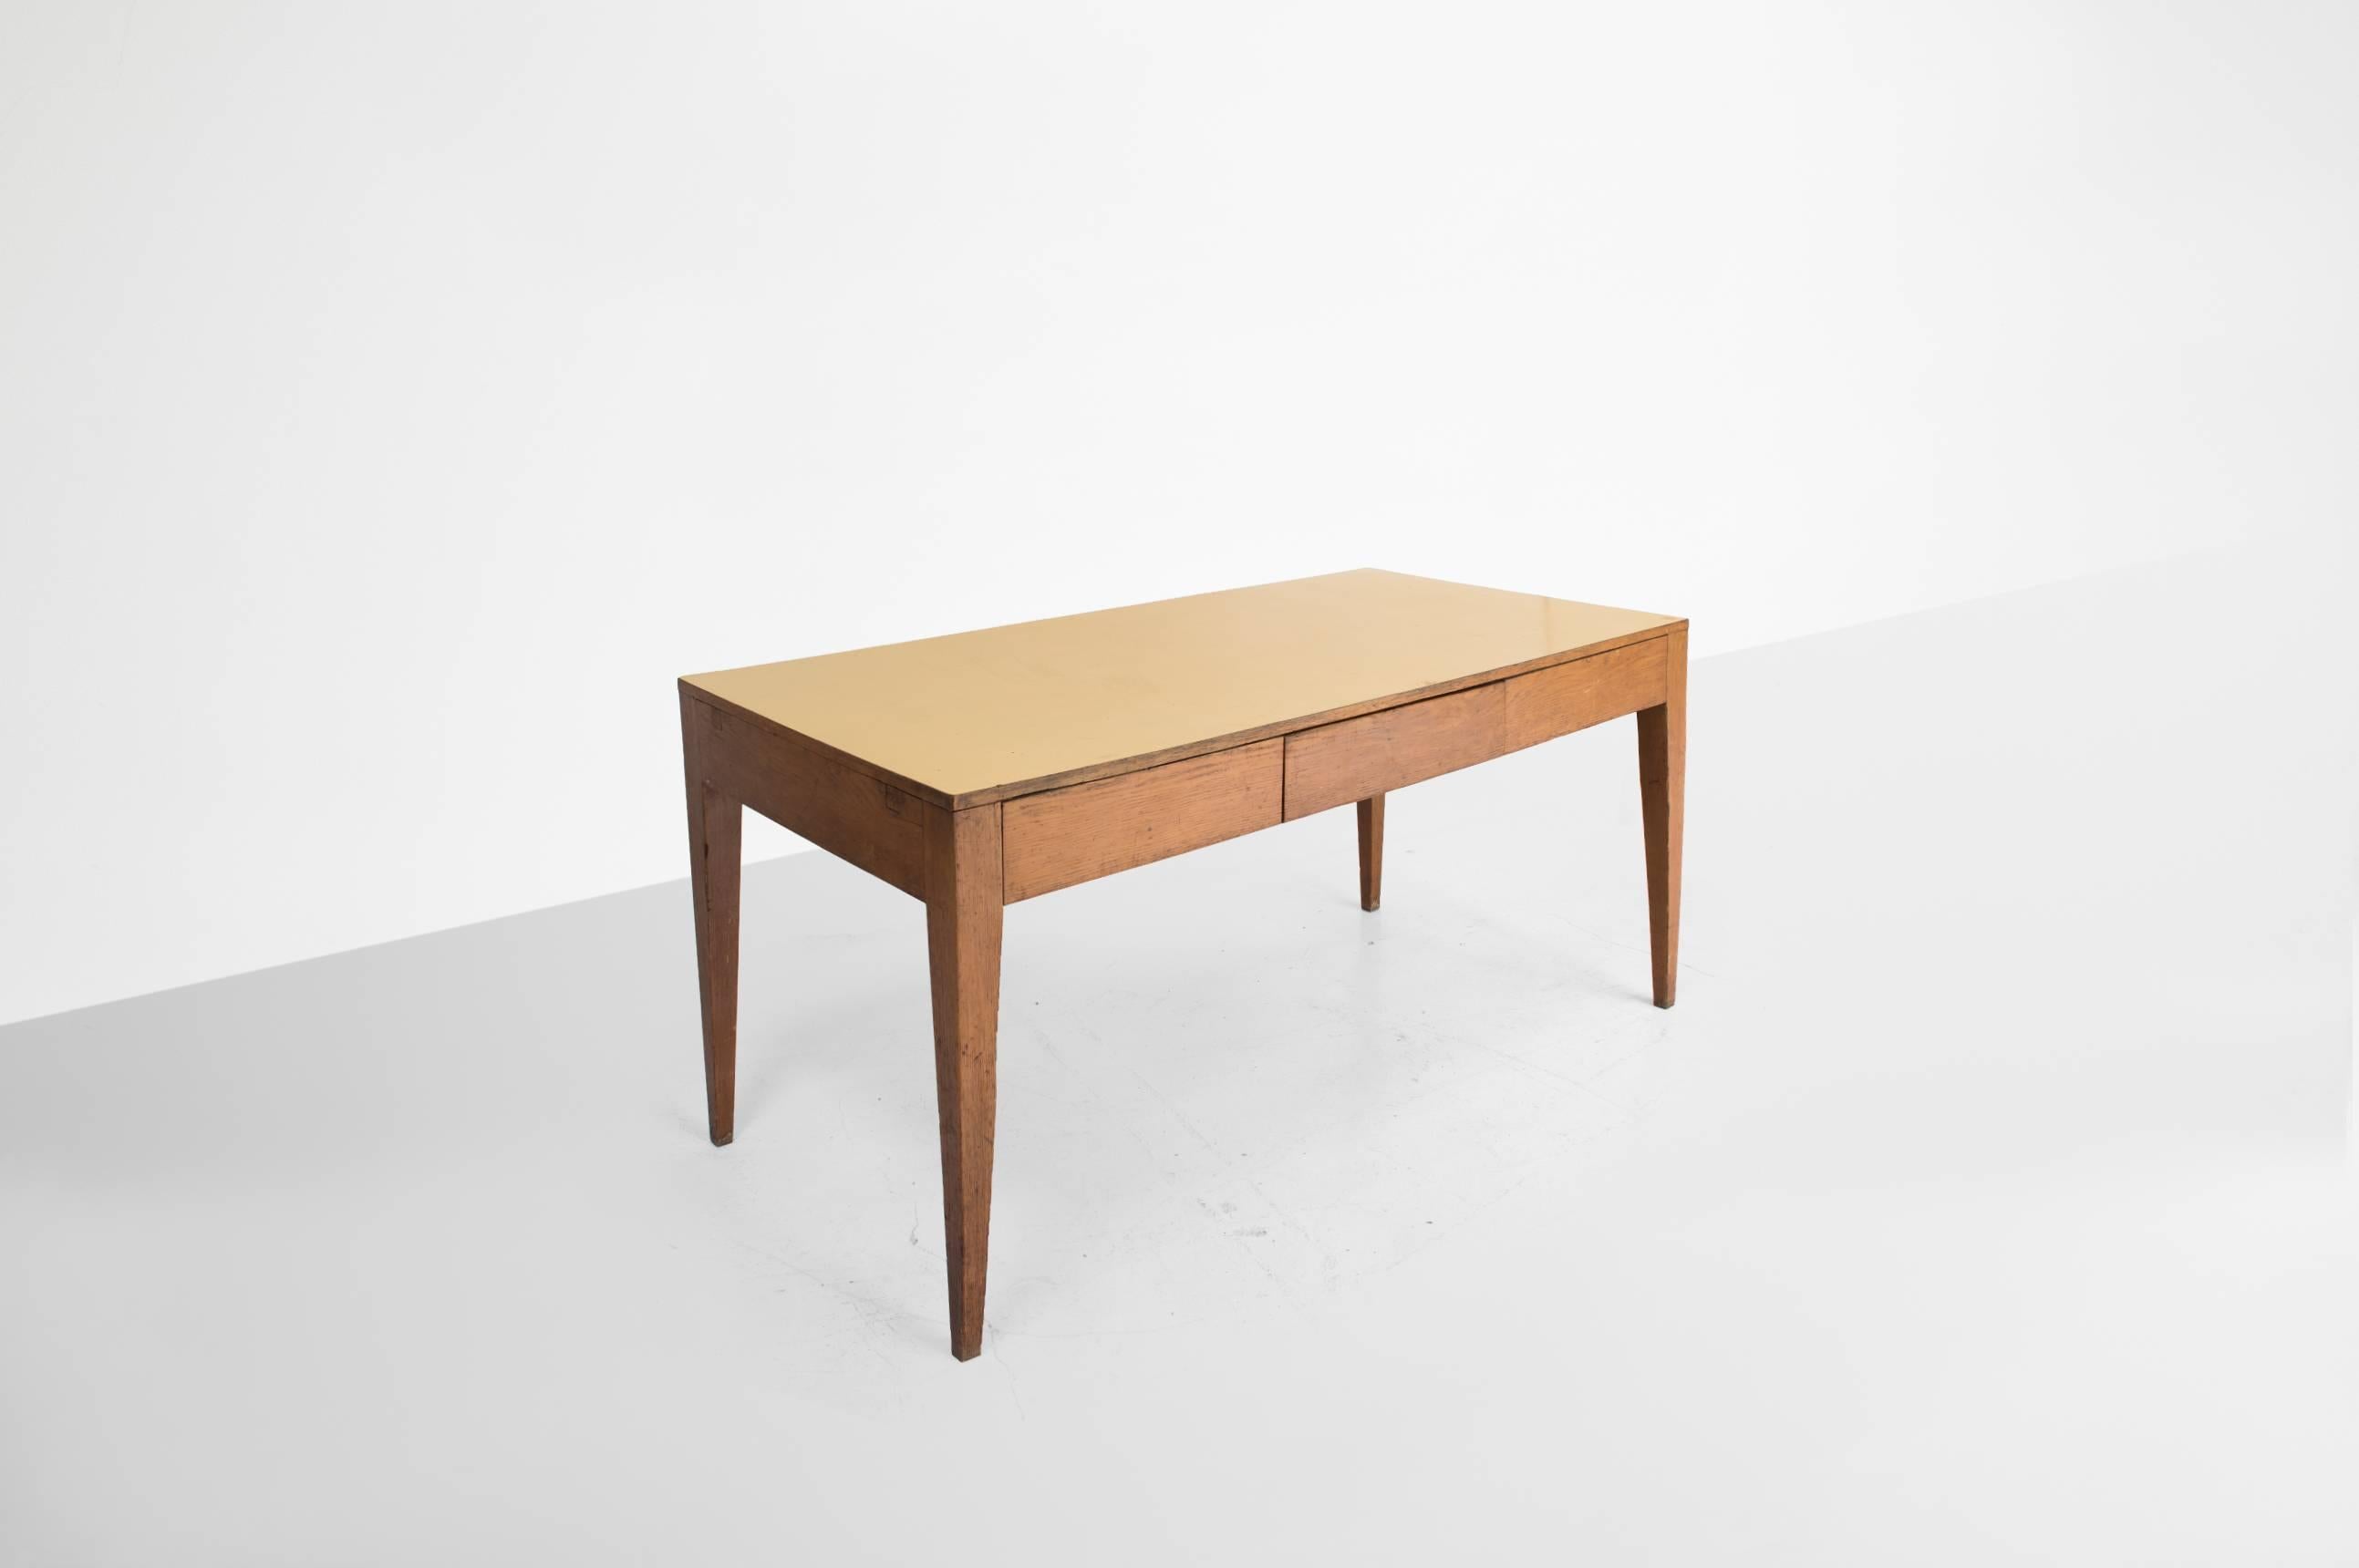 Gio Ponti (1891-1979),

table or desk.
Manufactured by Fratelli Strada,
Italy, 1950.
Walnut wood and yellow formica top.

Measurements
160 cm x 80 cm x 79h cm.
62.9 in x 31.4 in x 31.1h in.

Details
Together with a 